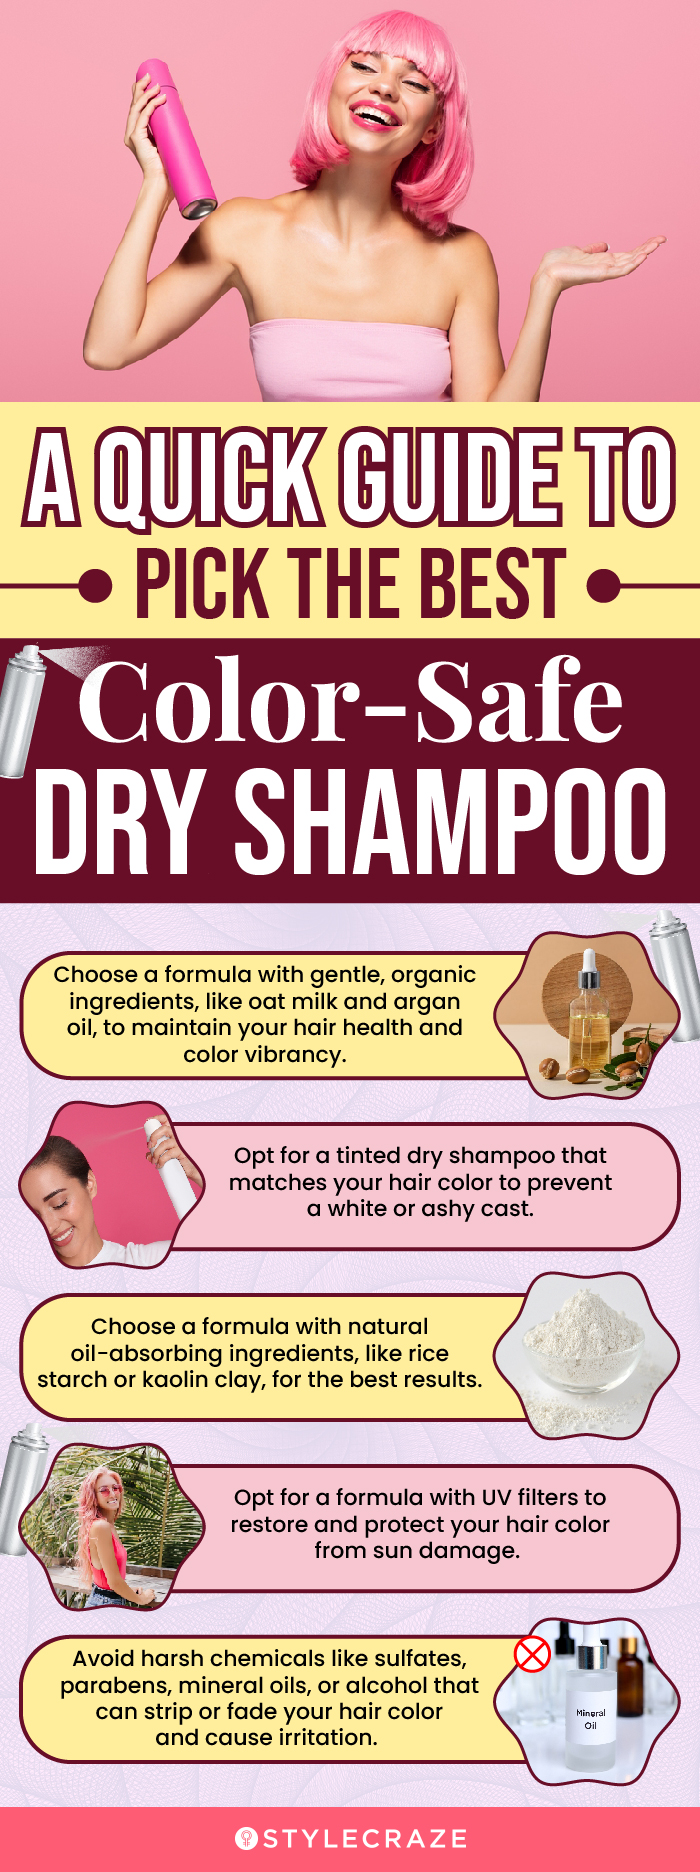 A Quick Guide To Picking The Best Color-Safe Dry Shampoo (infographic)